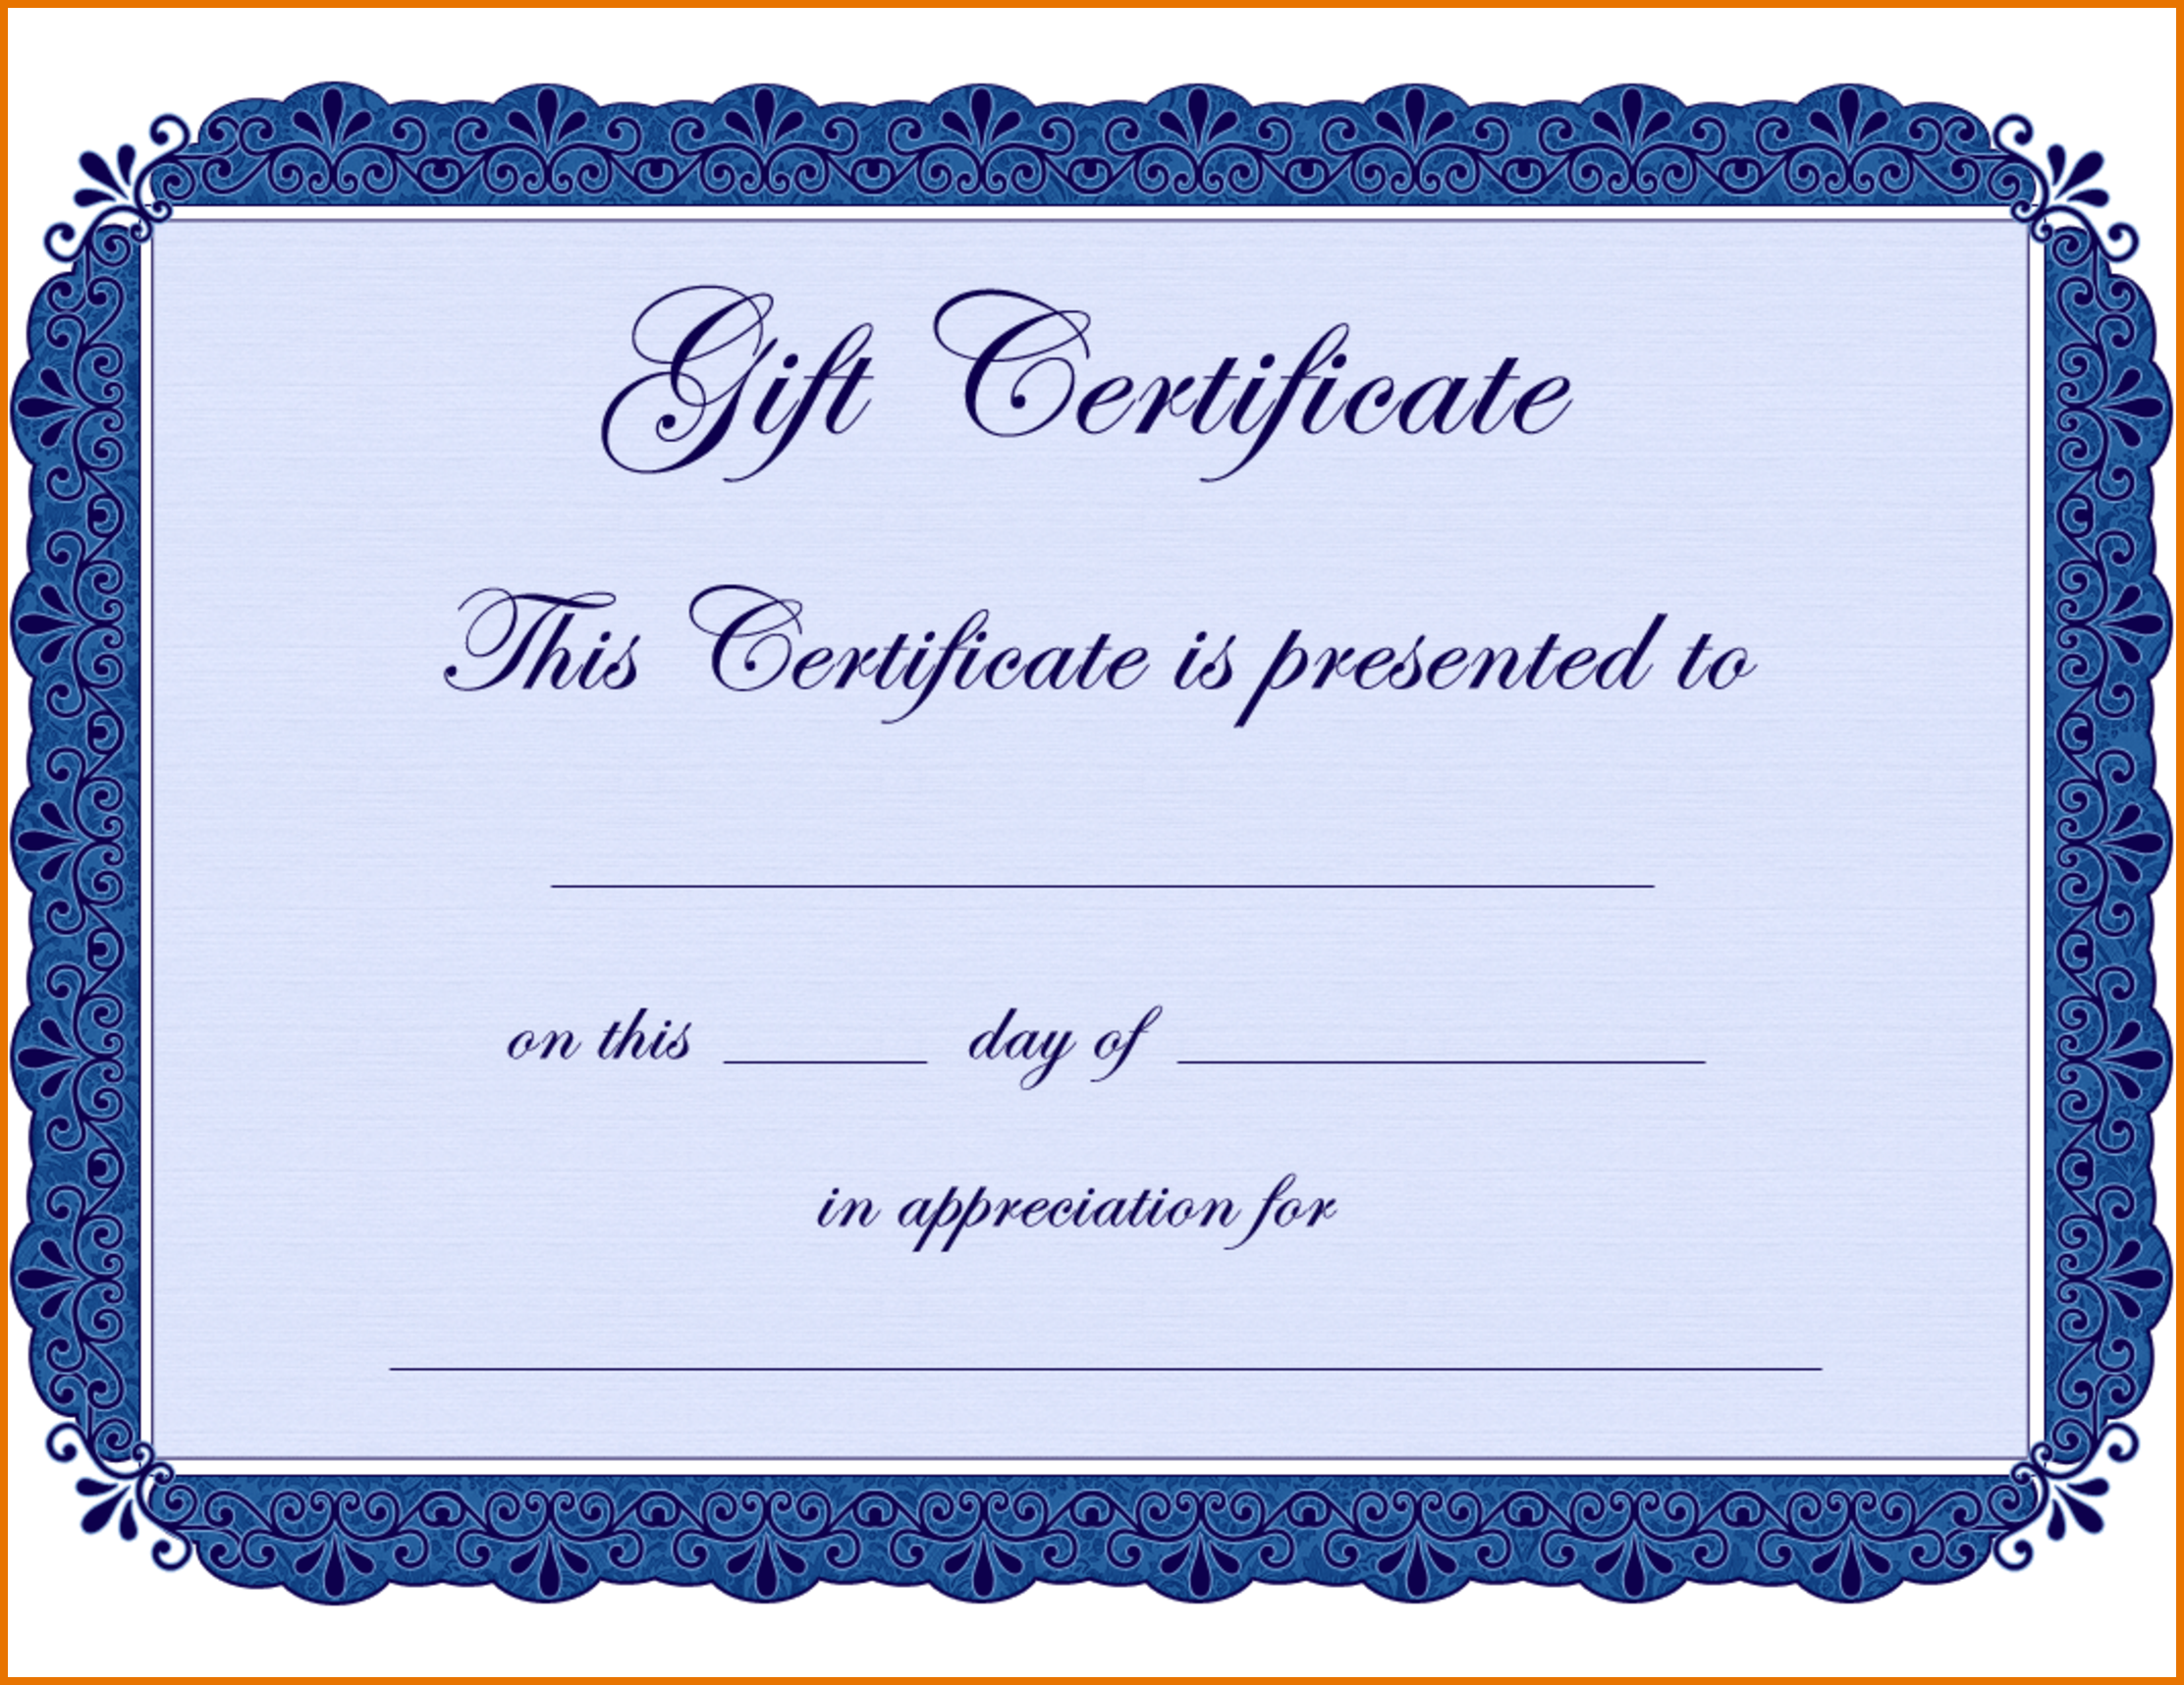 Certificate Template Free - ClipArt Best Pertaining To Blank Certificate Templates Free Download